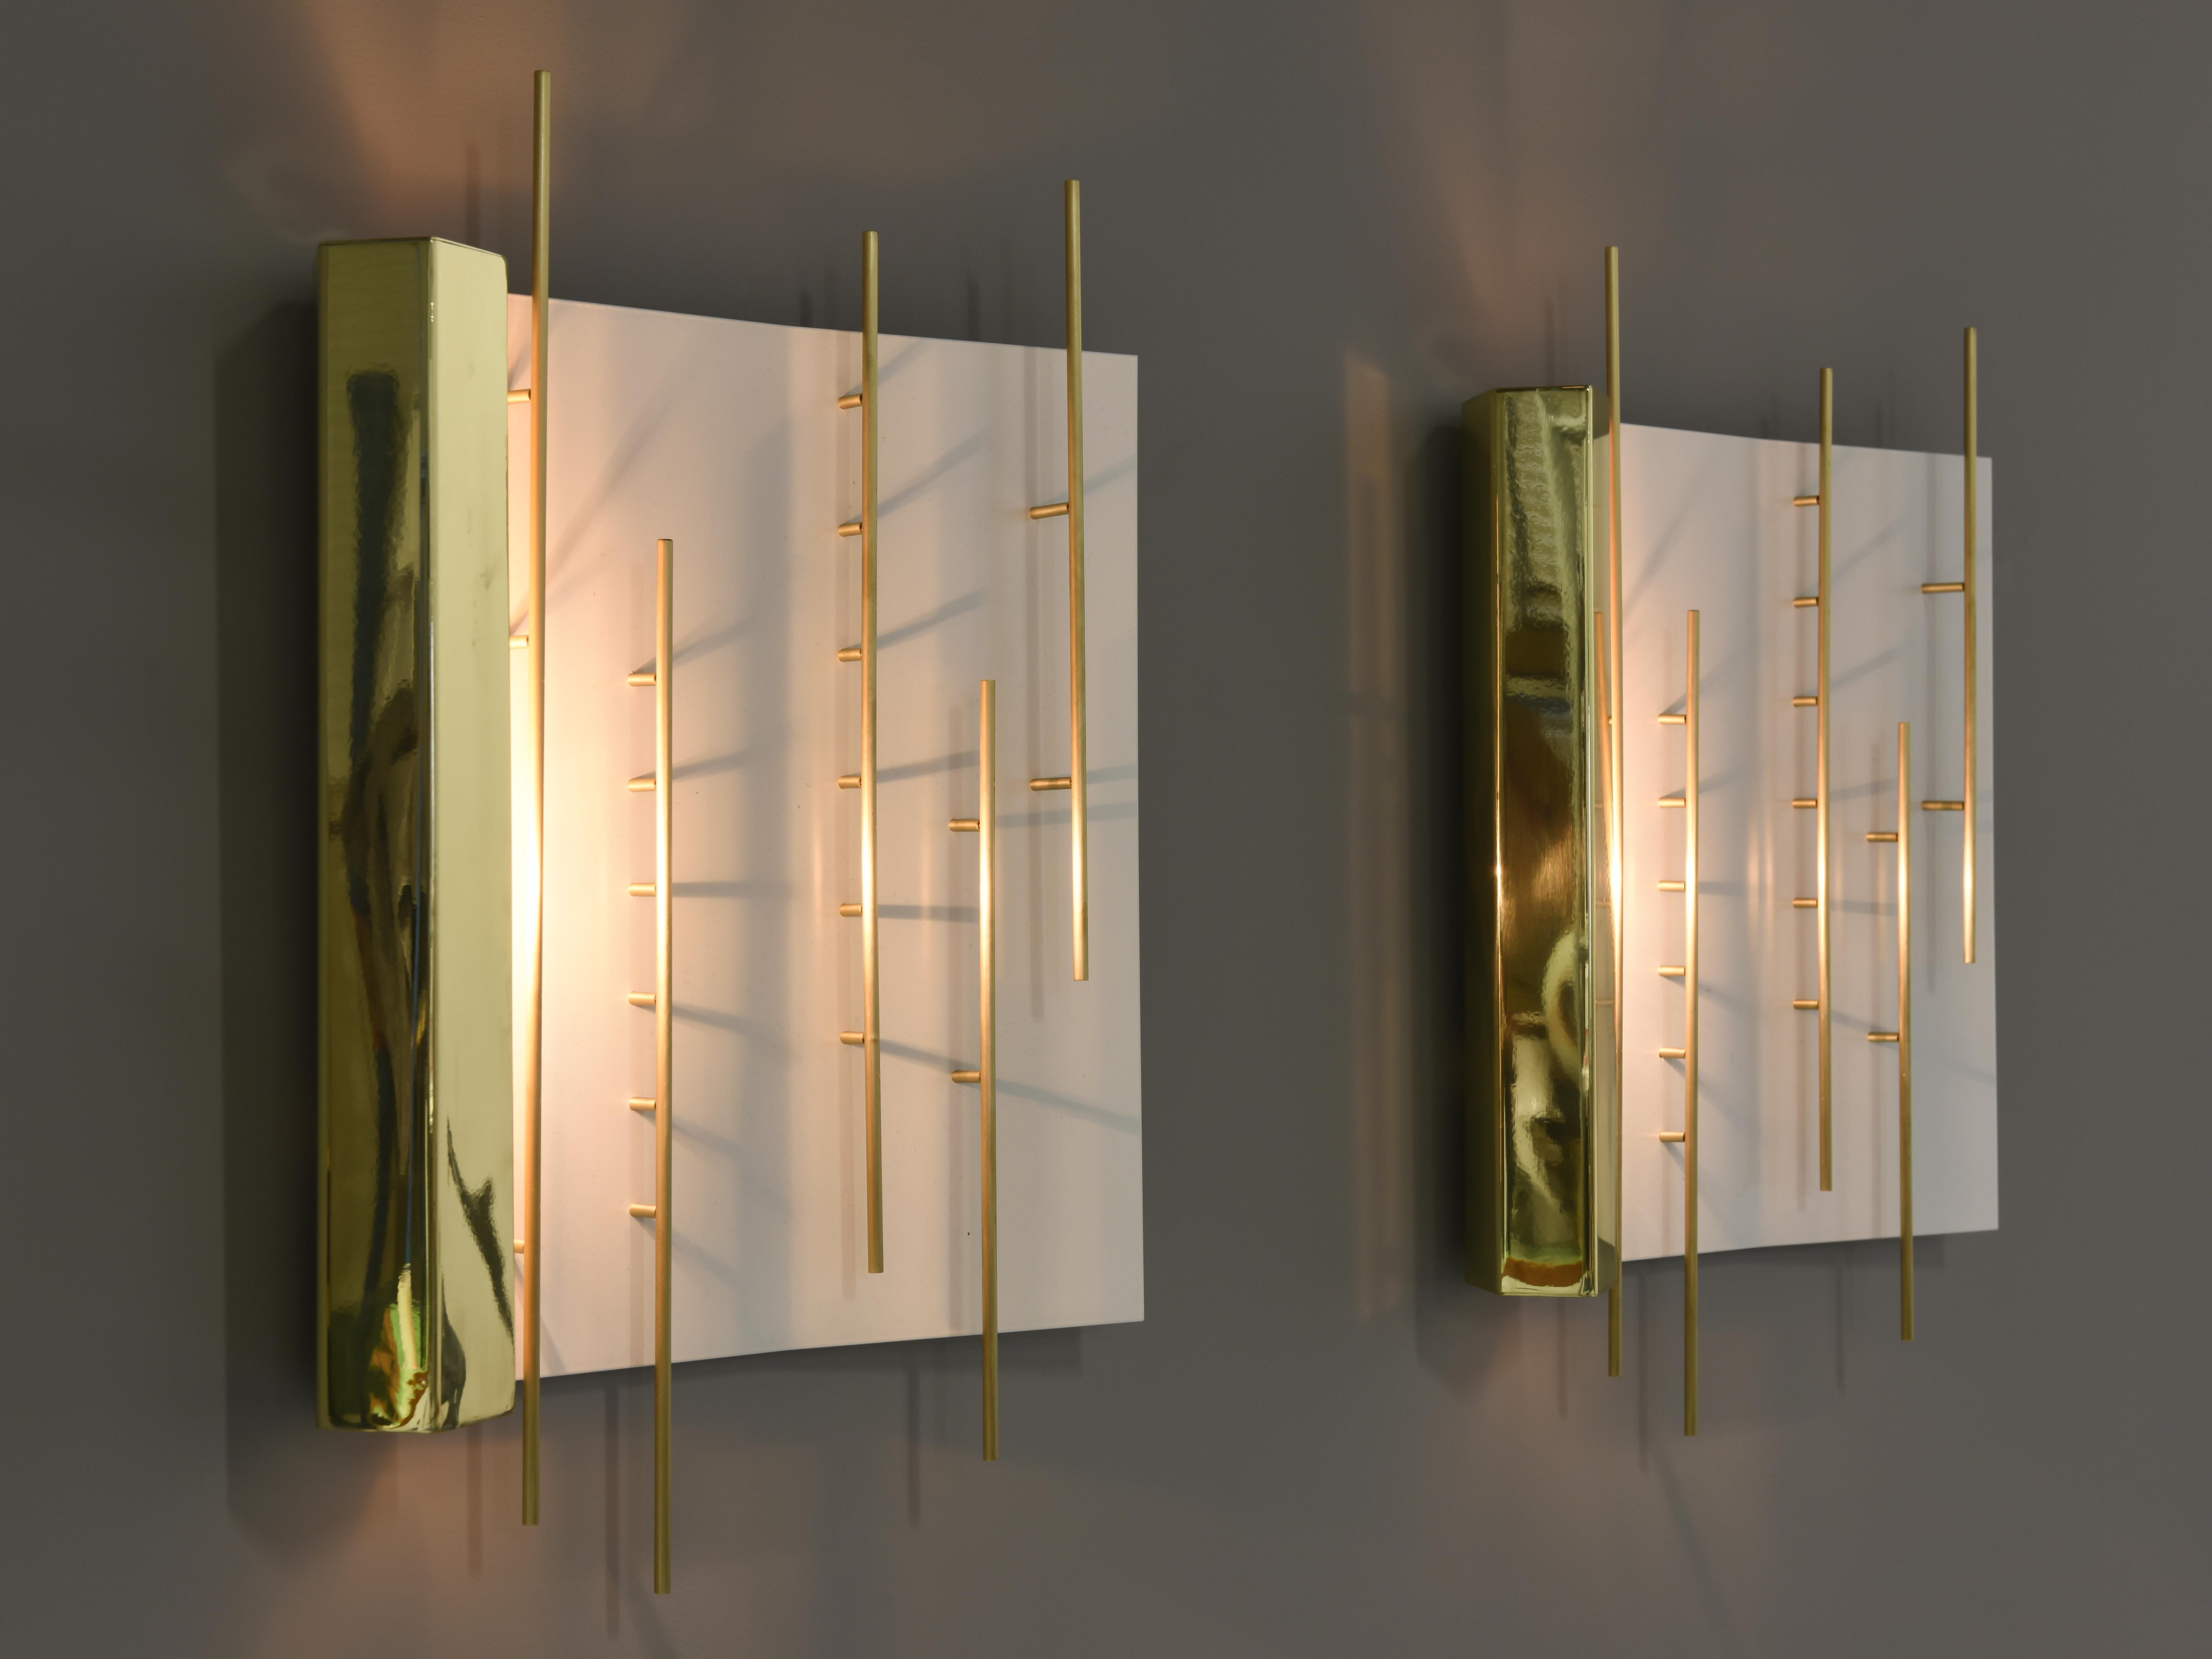 Elegant square wall sconces by  the famous designer and architect from Italy.
Very graphic lamps in brass and lacquered metal. The light hidden on the left side creates play of light on the lamp and wall.

Signed with applied brass manufacturer's